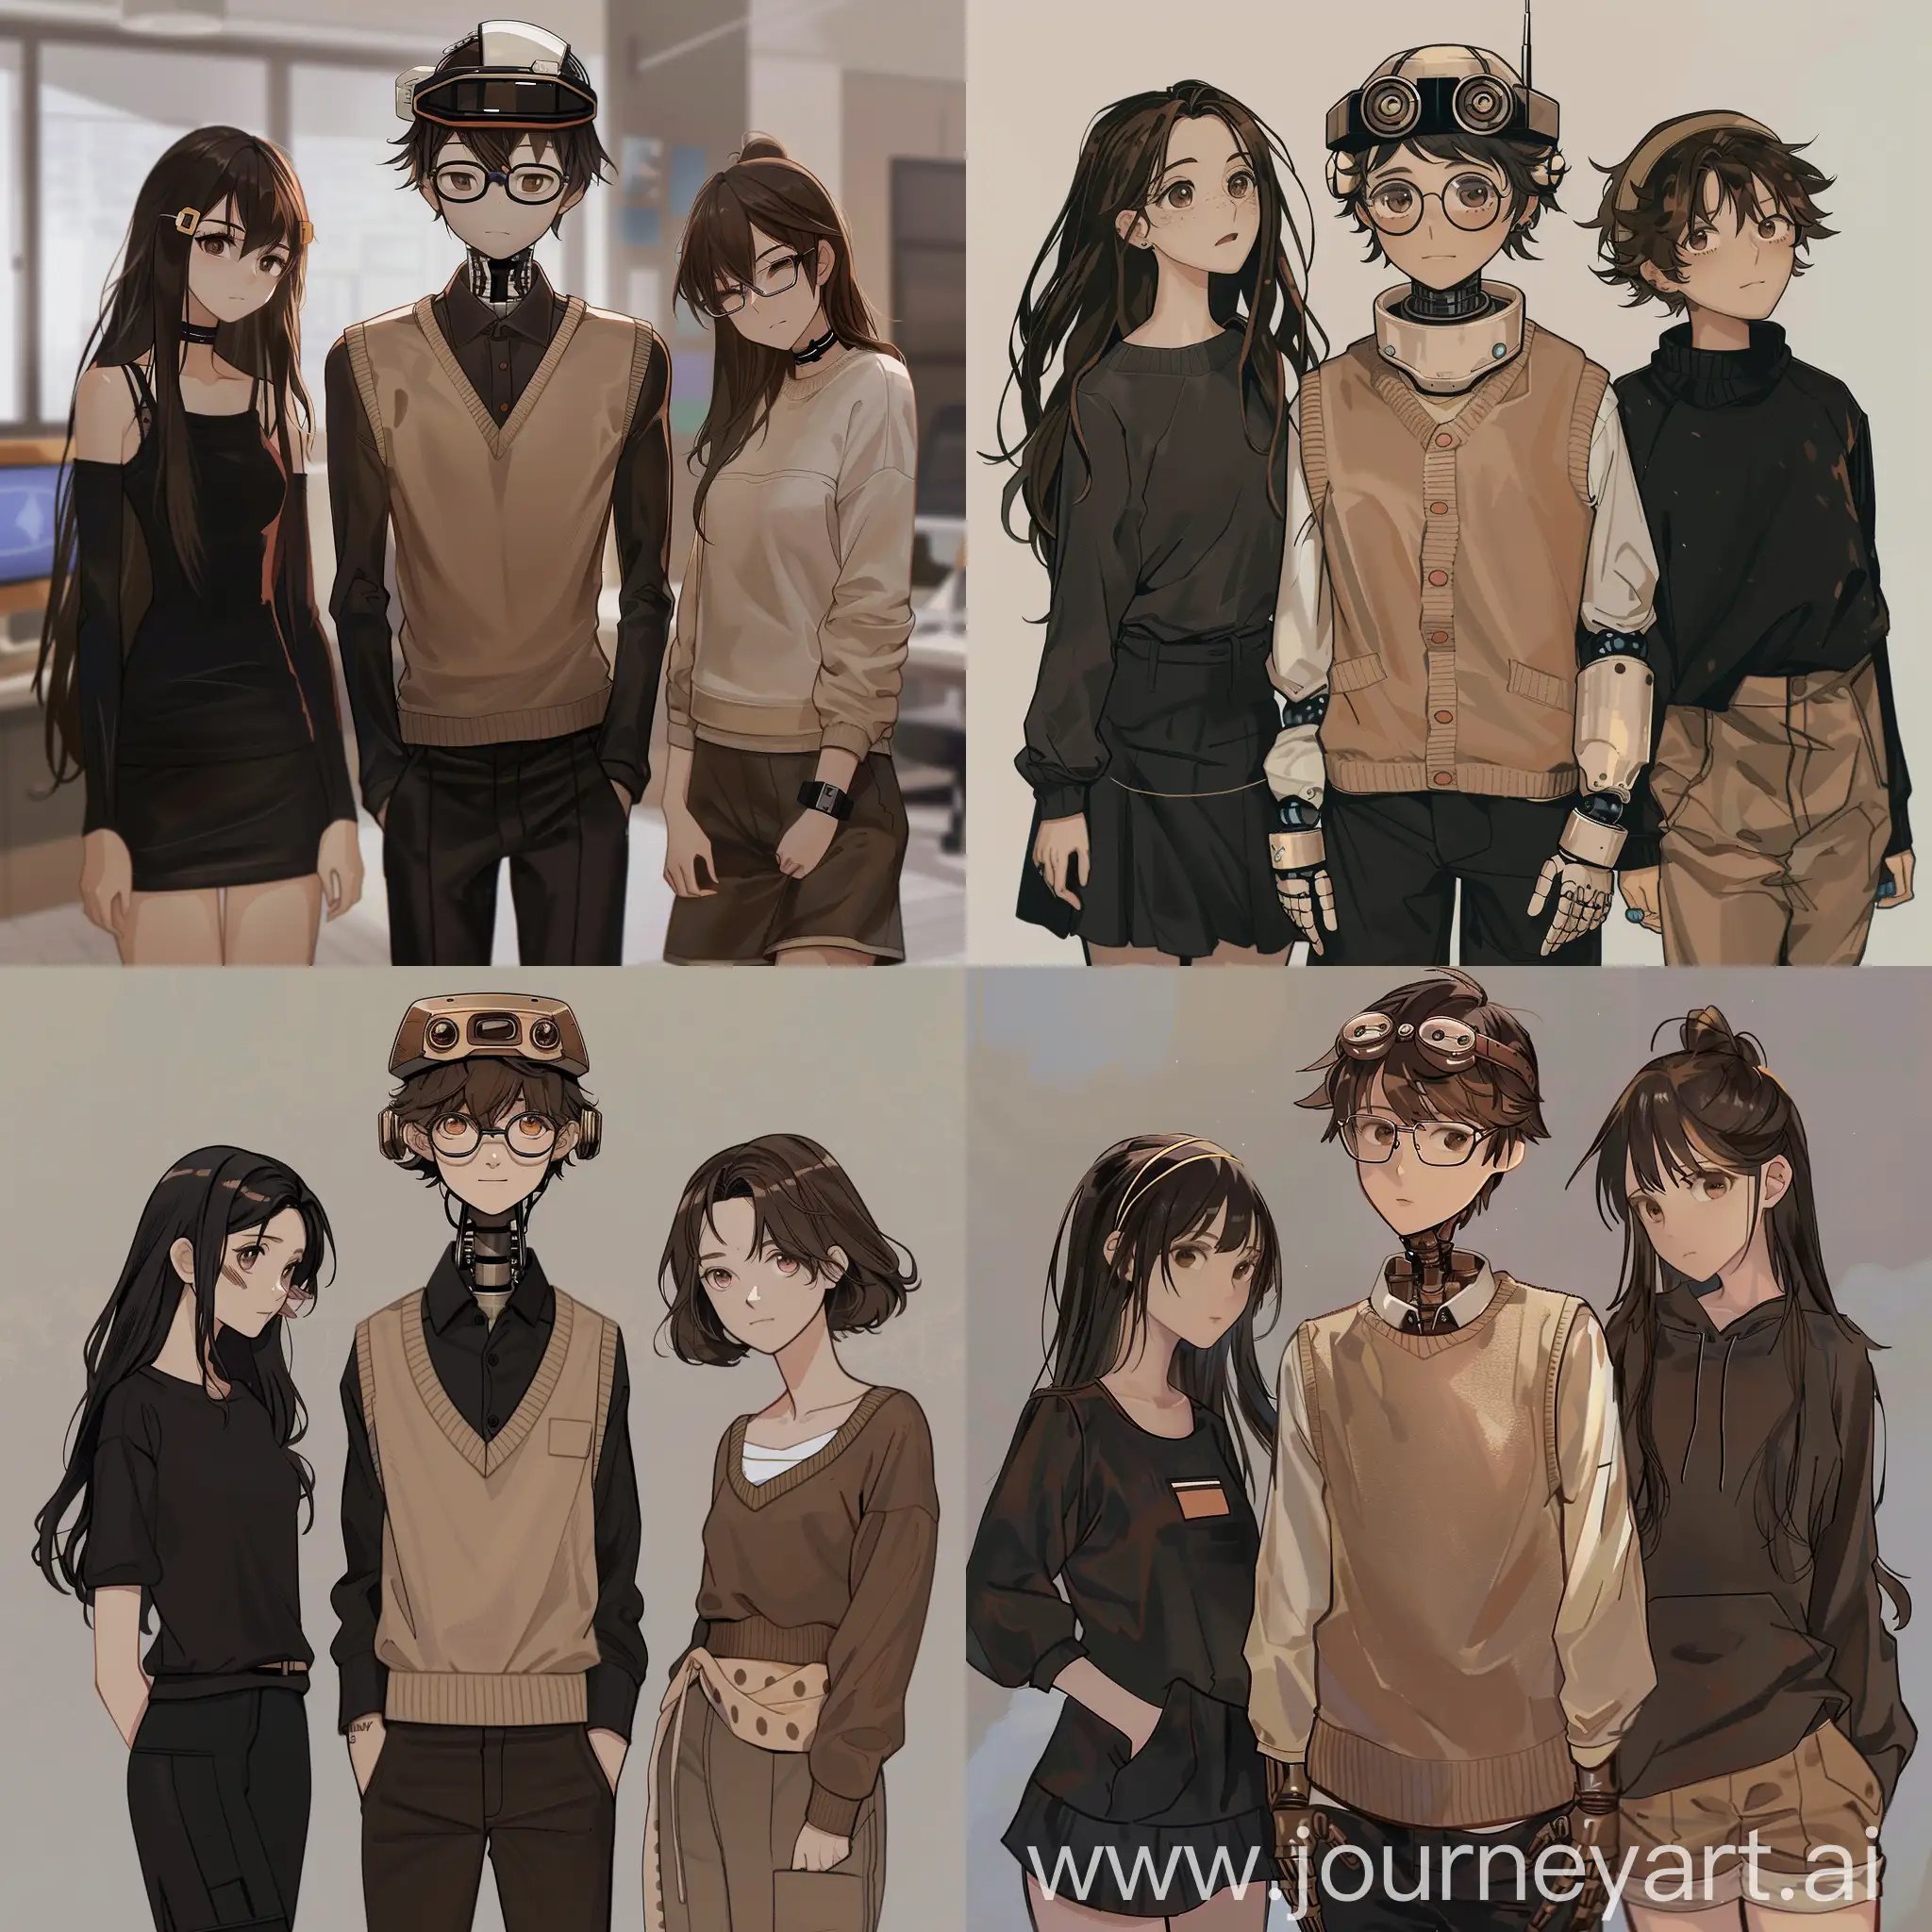 three teenagers, one bot in the middle with brown hair and glasses on his head with brown beige sweater vest, one girl with long dark hair and black outfit, and another girl with short brown hair with comfy clothes